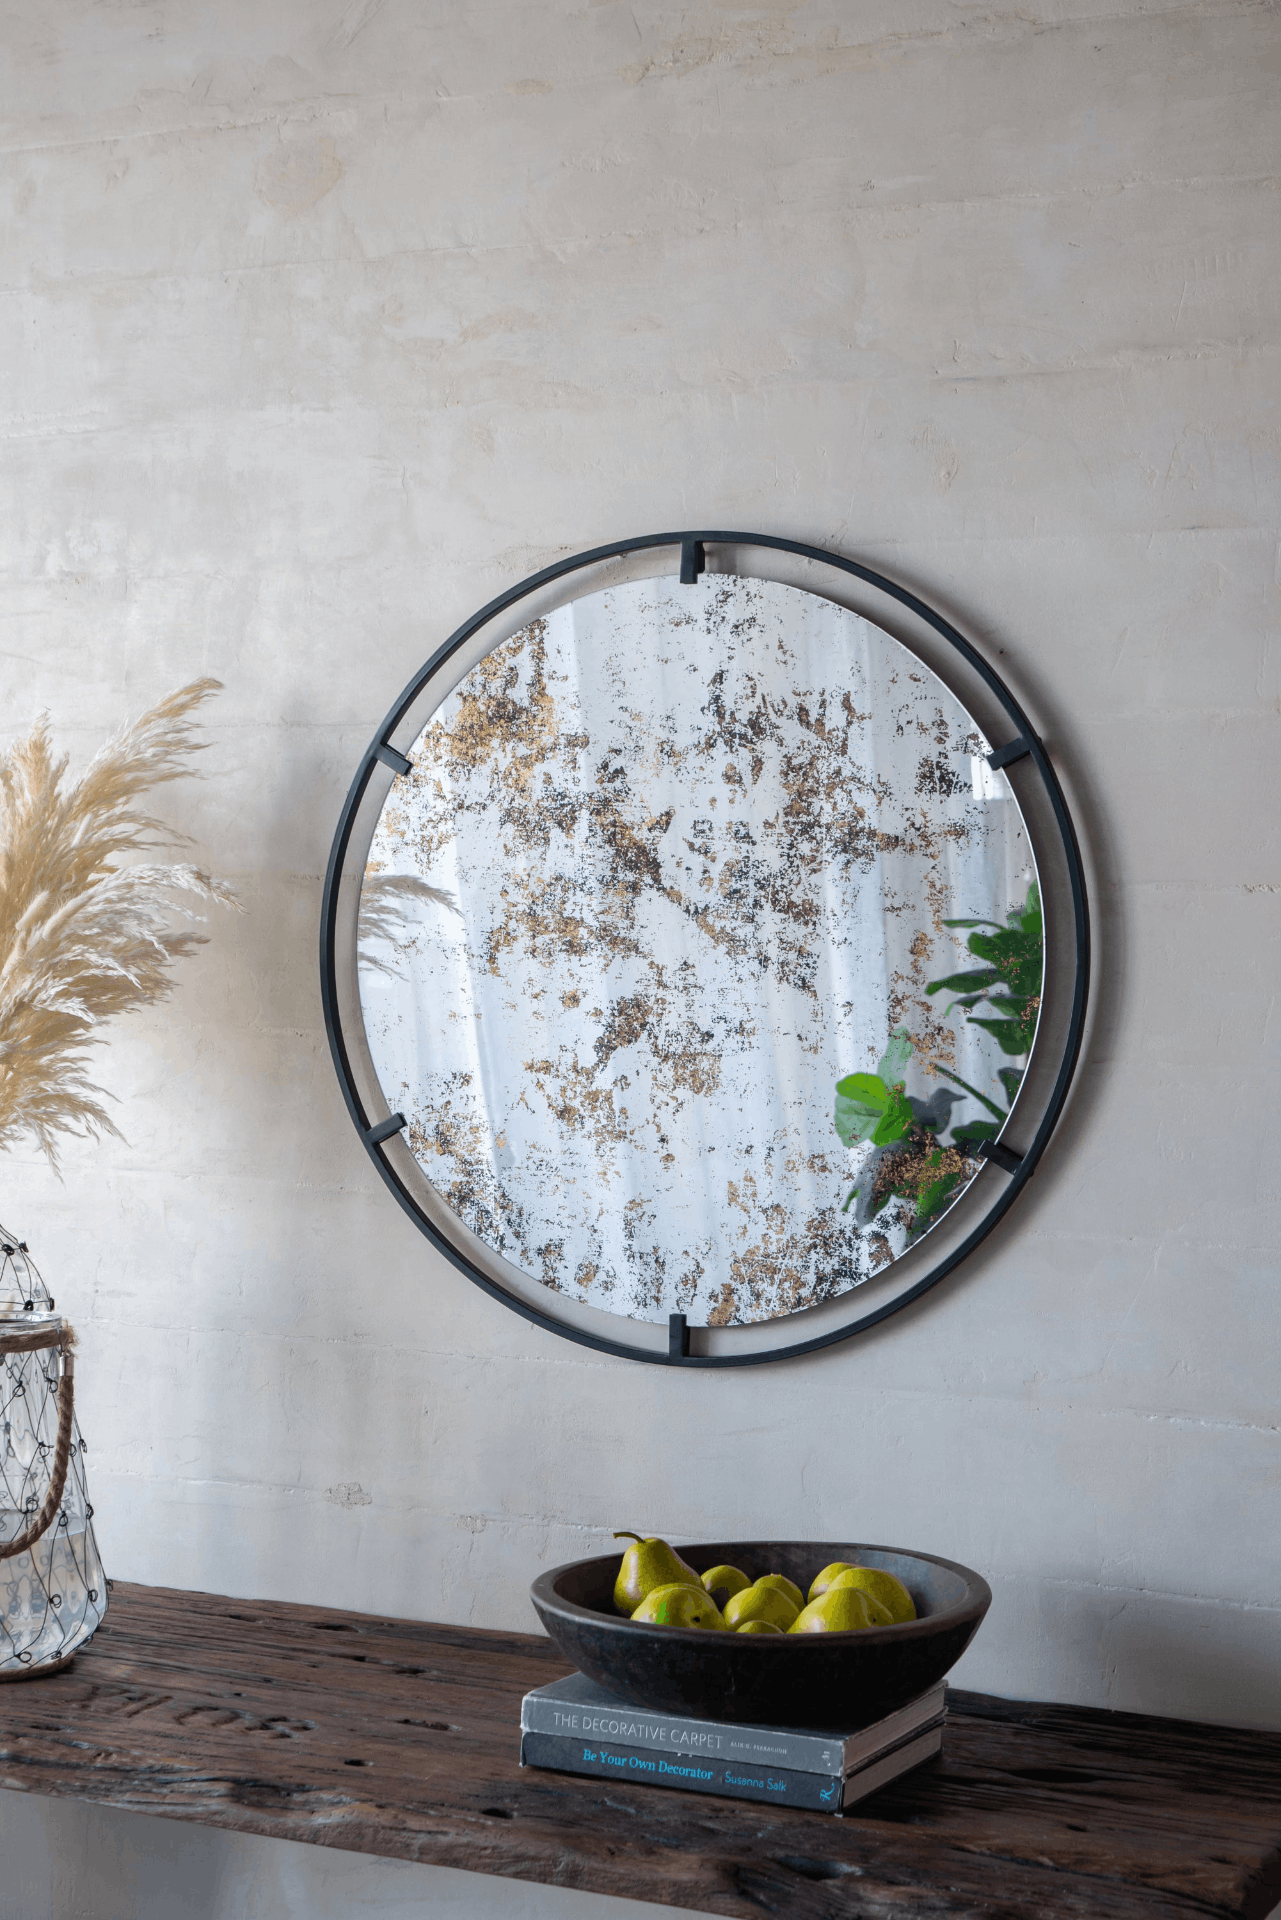 D31.5x0.5" Theodor Mirror with industrial design Round Mirror with Metal Frame for Wall Decor & Entryway Console Lean Against Wall 